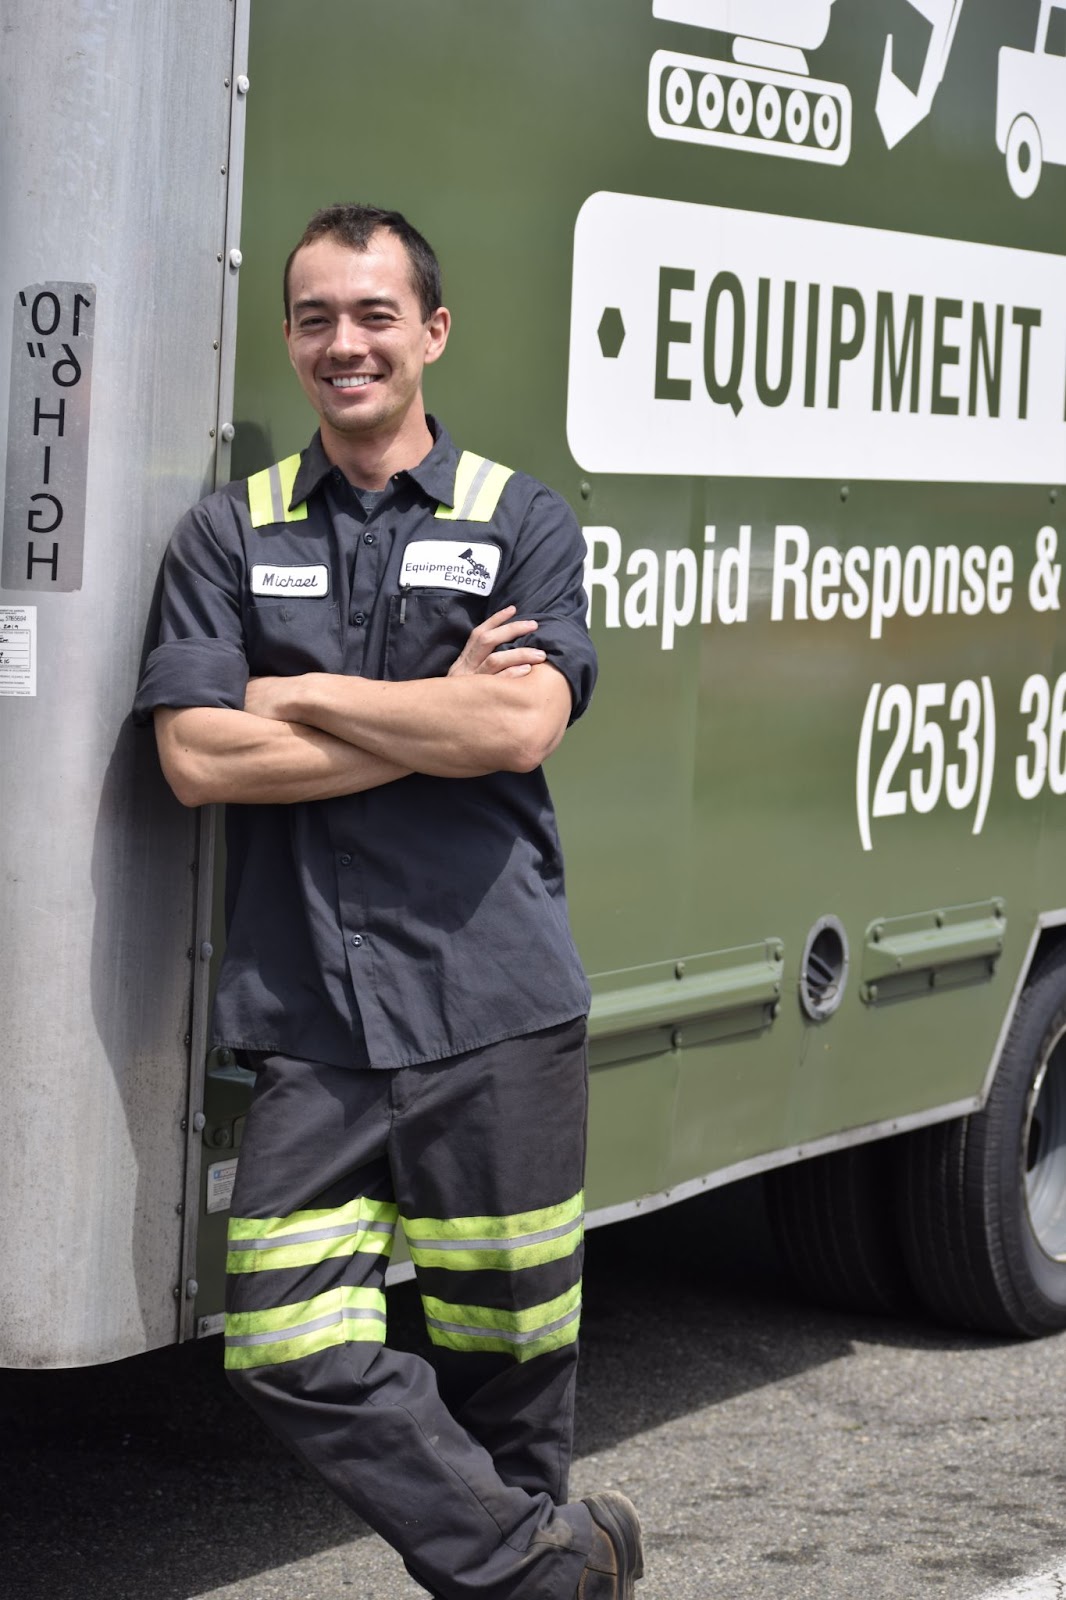 A smiling Equipment Experts, Inc. employee standing in front of an Equipment Experts, Inc. branded truck